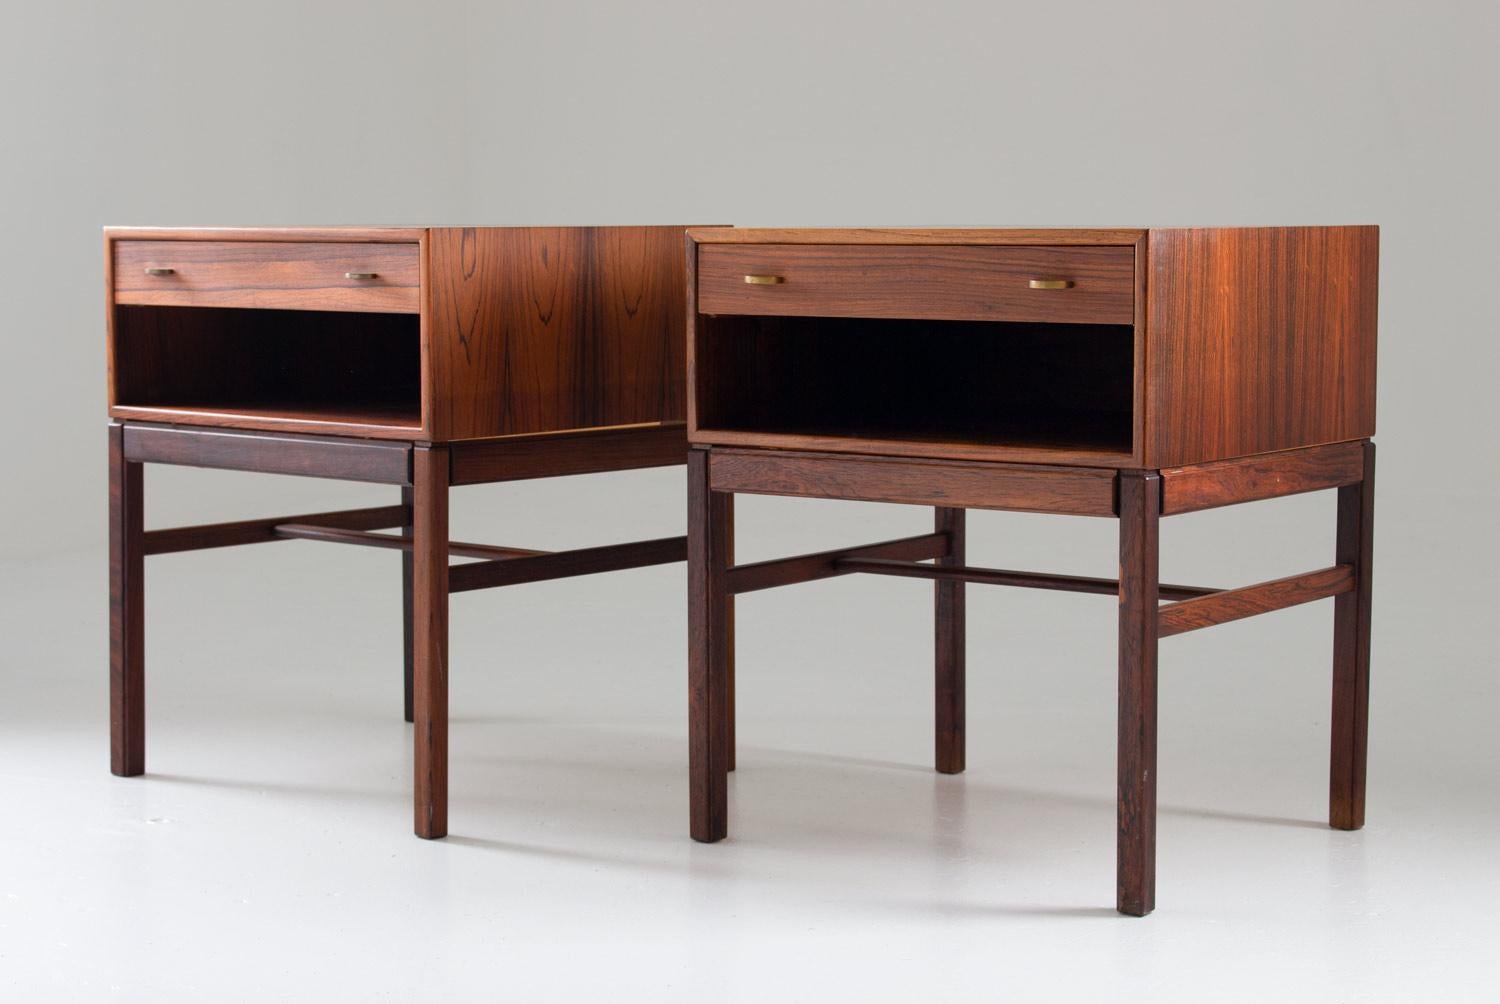 A pair of bedside tables in rosewood with brass details, model Casino by Gunnar Myrstrand and Sven Engström for Tingströms, Sweden, 1960s. 
The tables consist of a drawer on top with an open shelf below. 
Condition: Very good original condition